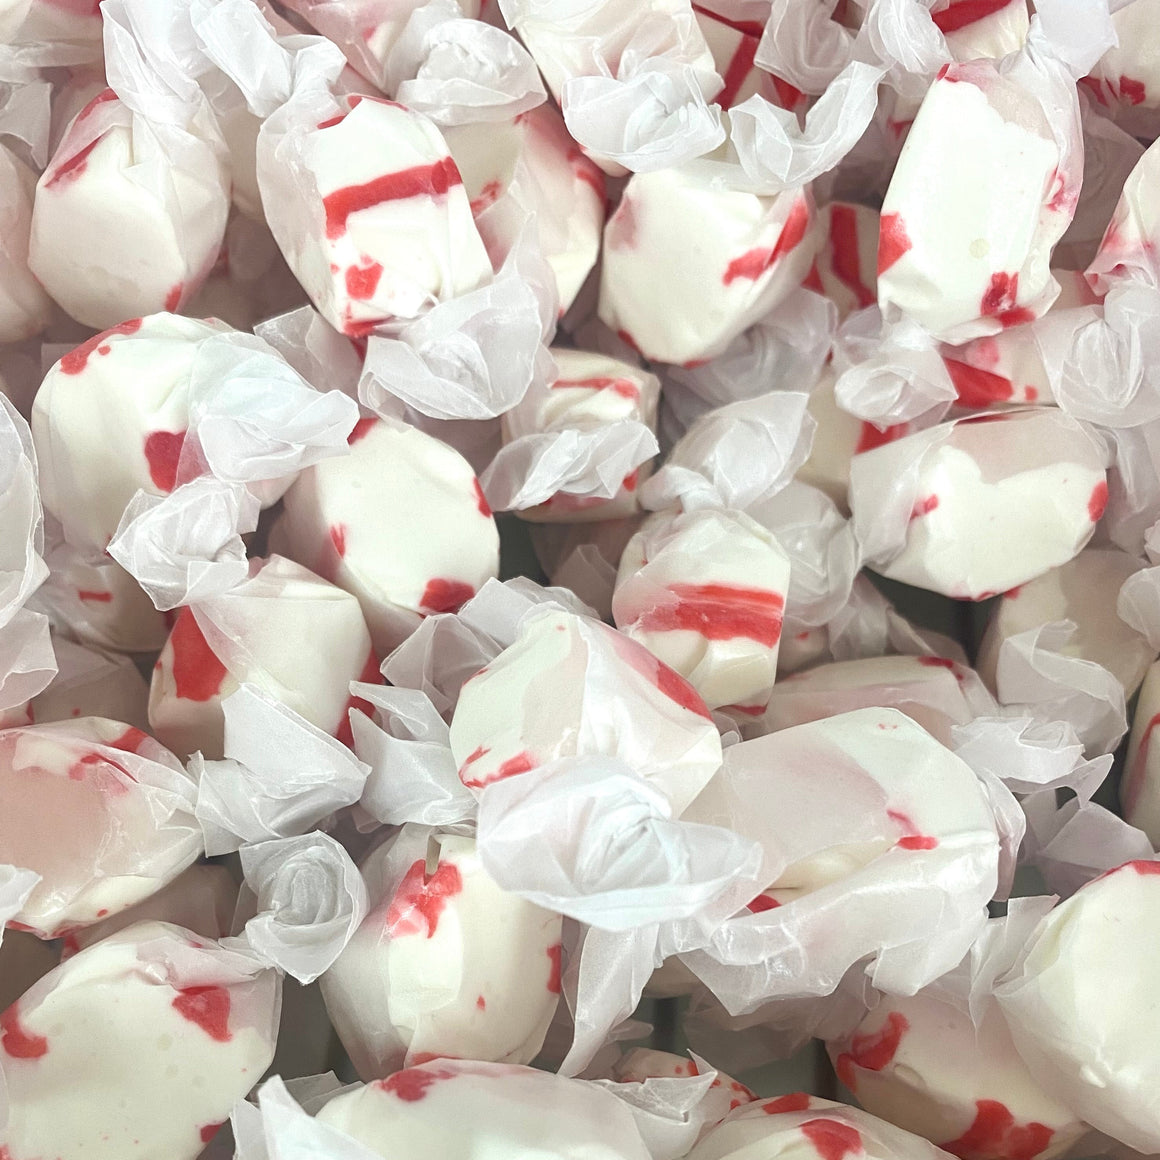 All City Candy Peppermint Salt Water Taffy - 3 LB Bulk Bag Bulk Wrapped Sweet Candy Company For fresh candy and great service, visit www.allcitycandy.com